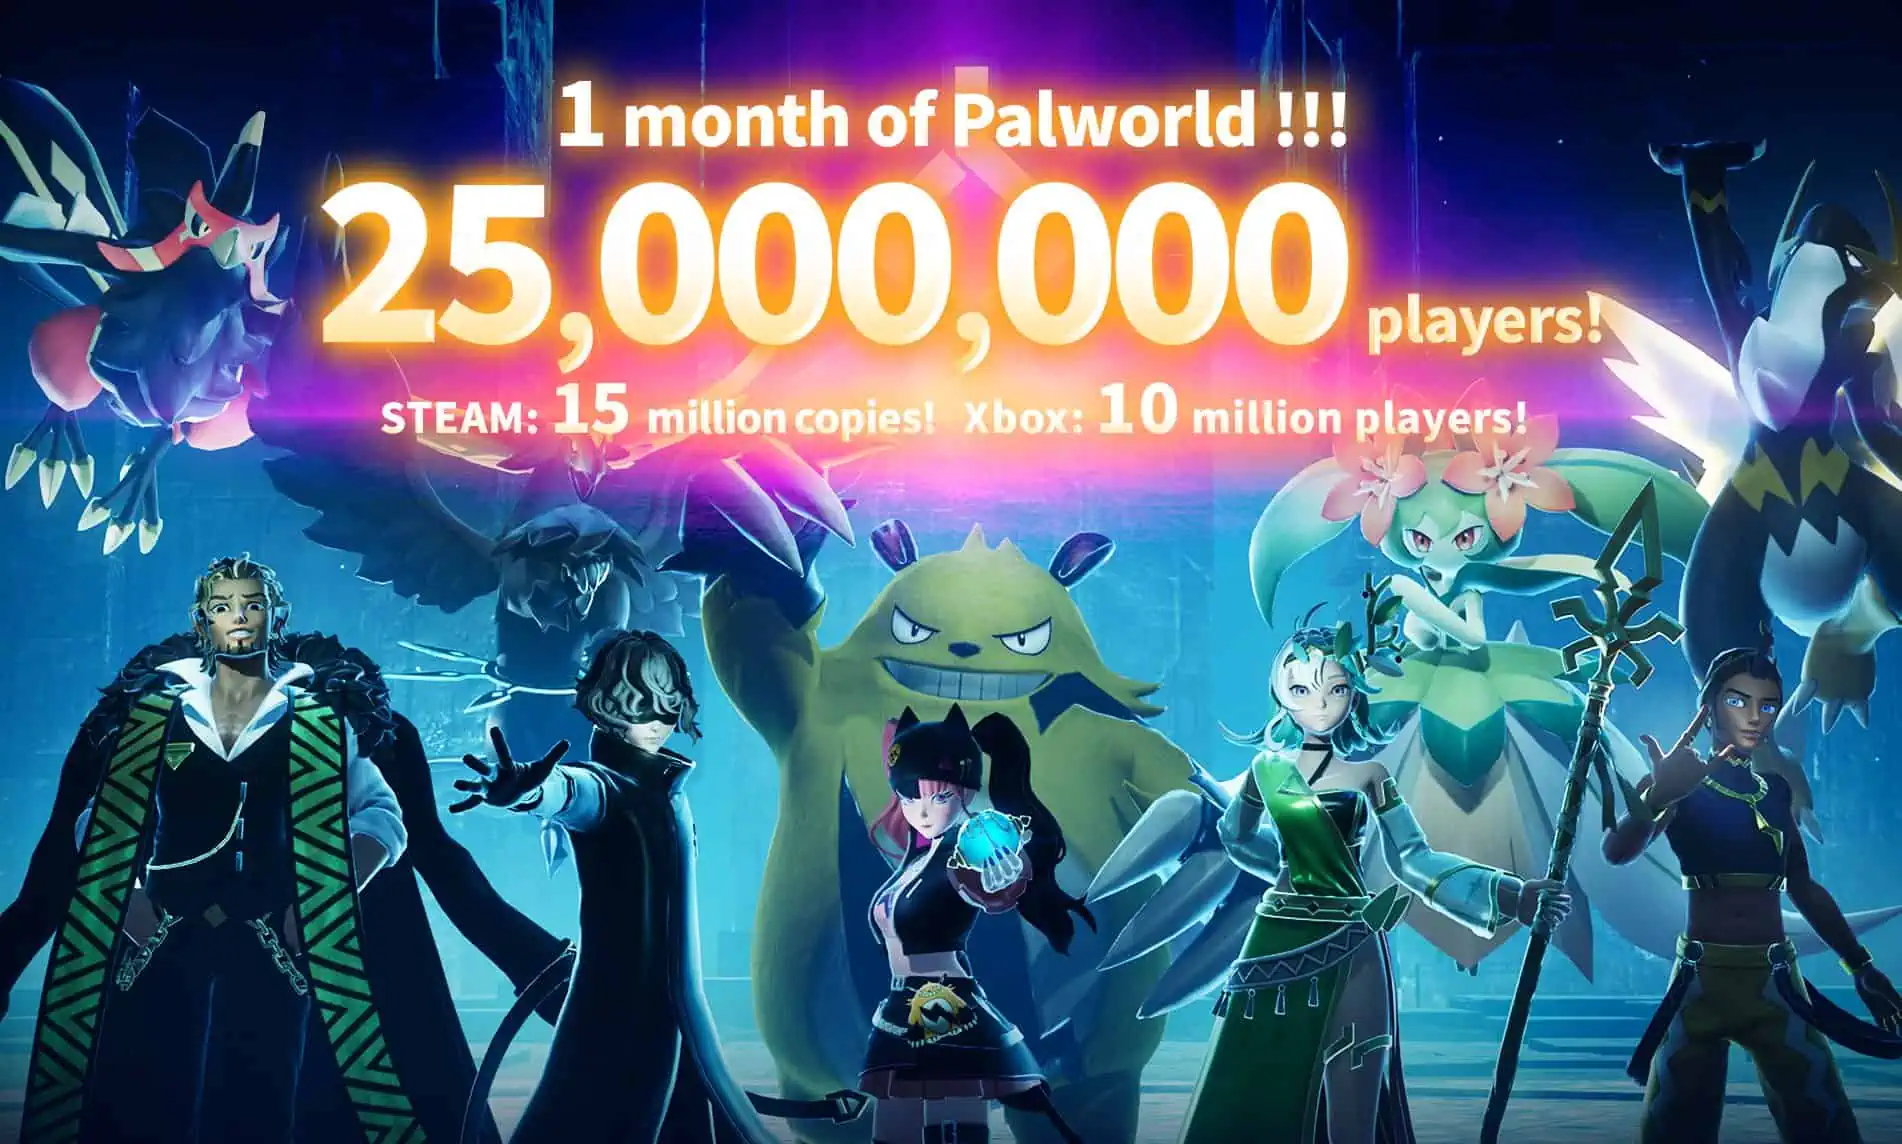 The biggest ever 3rd-party launch on Xbox Game Pass, Palworld, crosses 25m players within a month